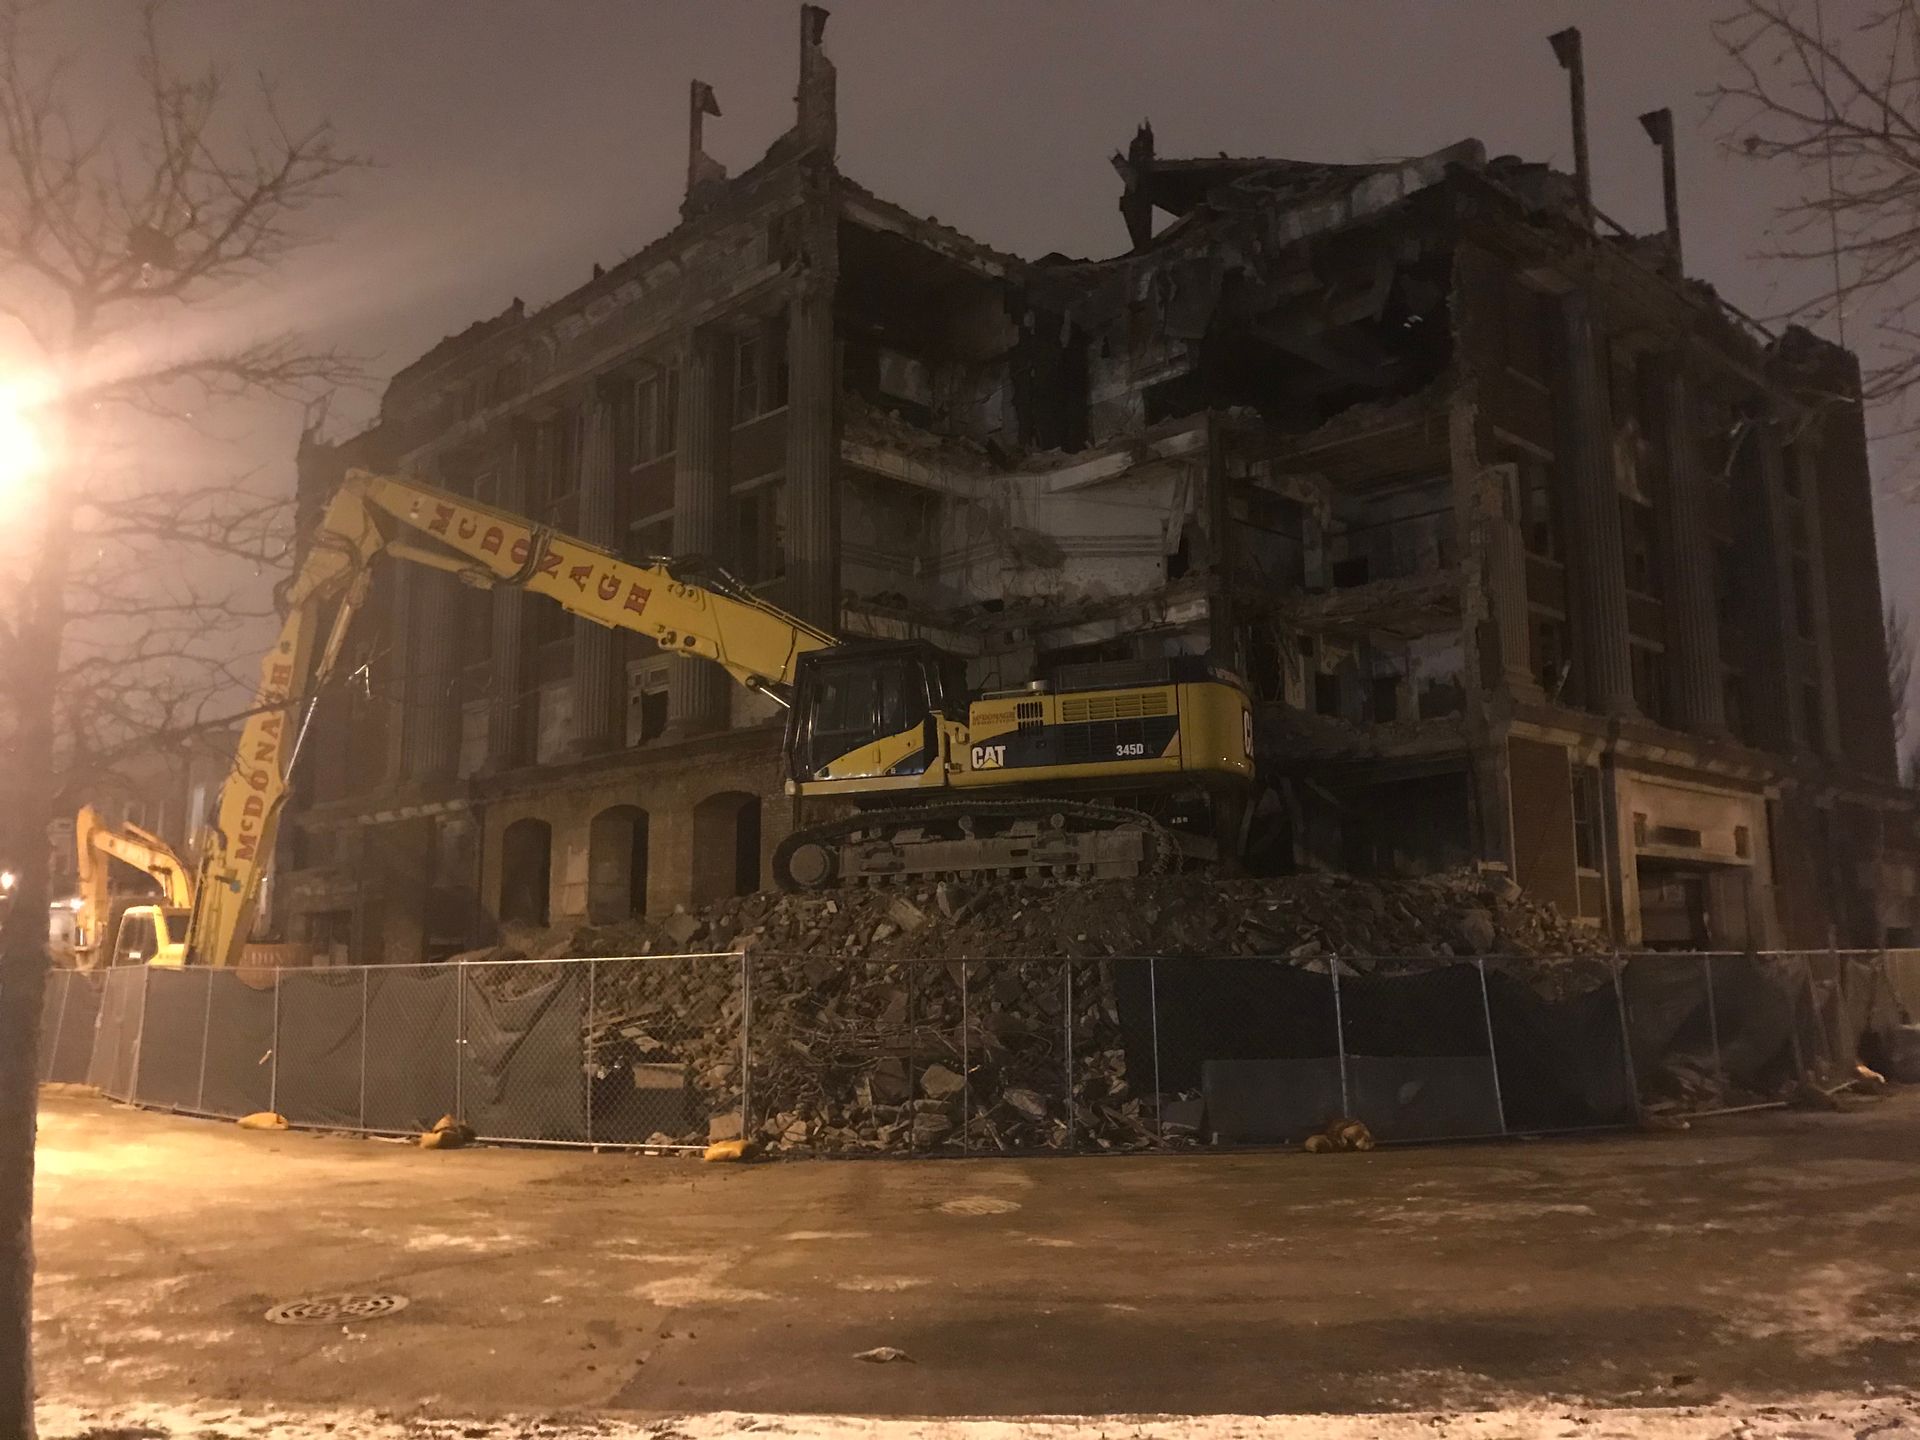 A large building is being demolished at night.